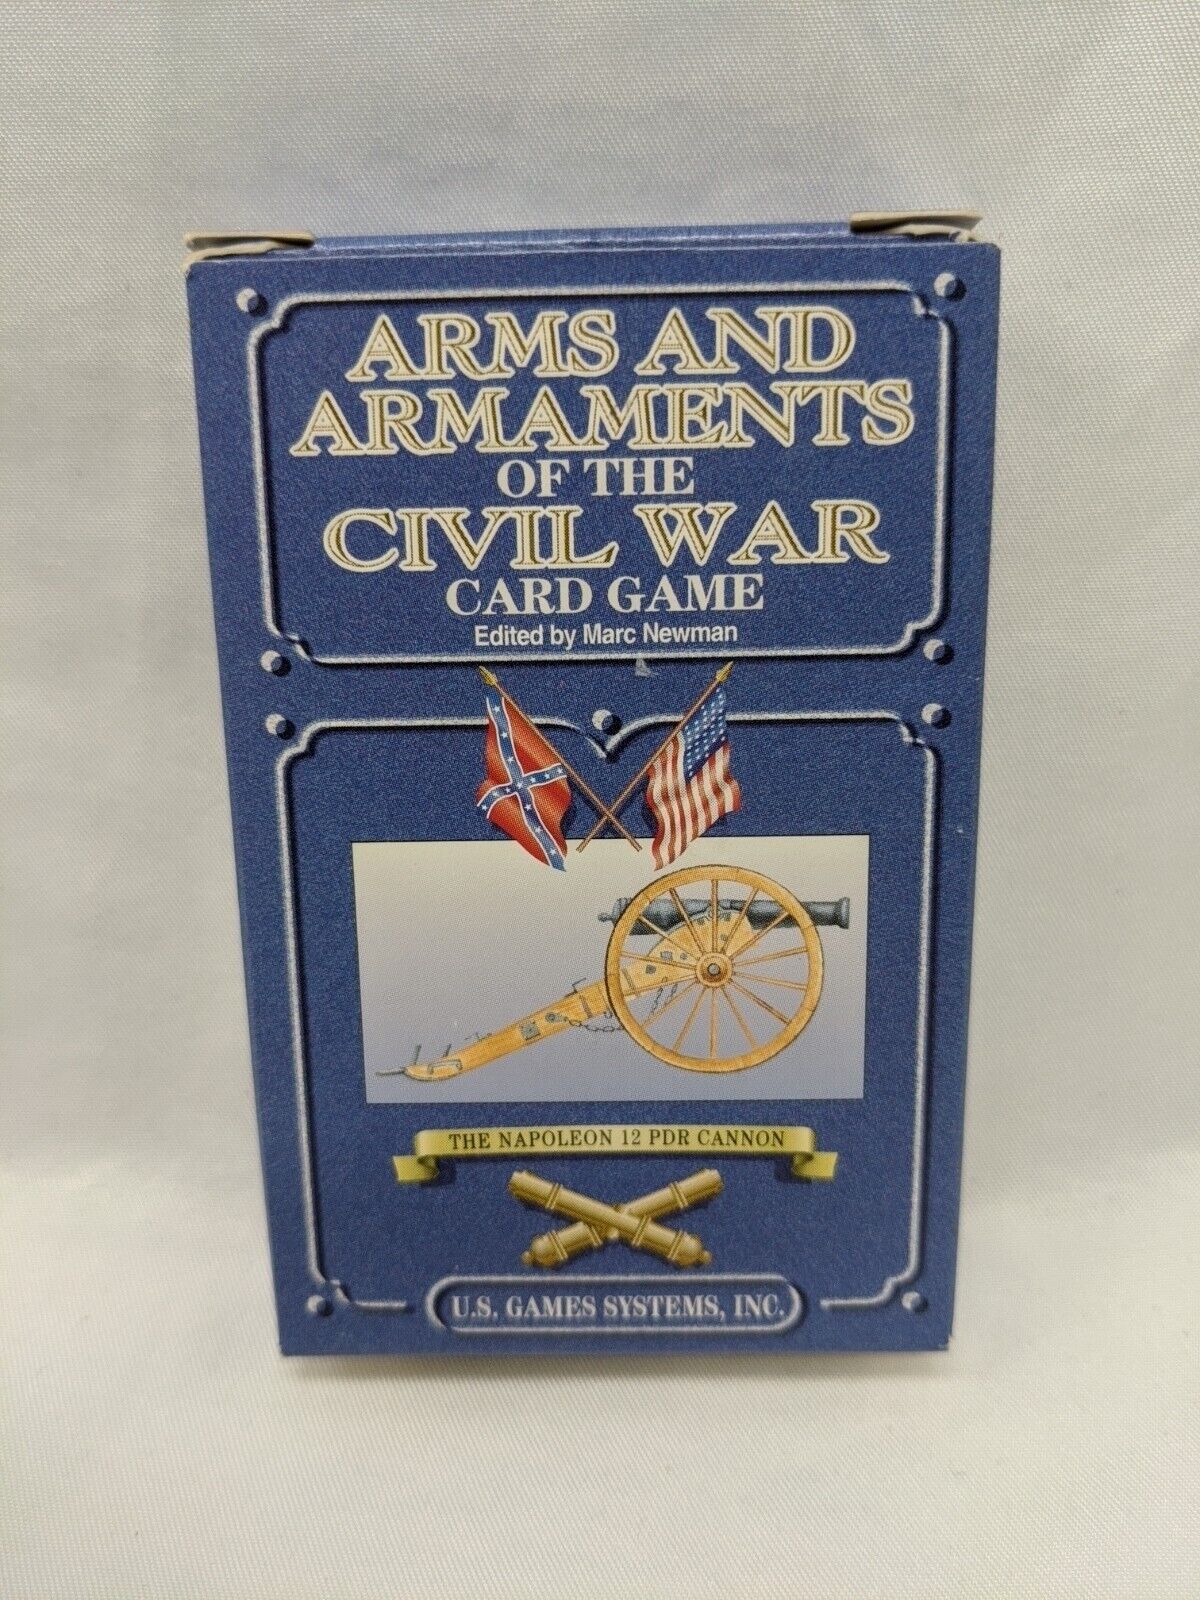 Arms And Armaments Of The Civil War Card Game Playing Card Deck The Napoleon 12